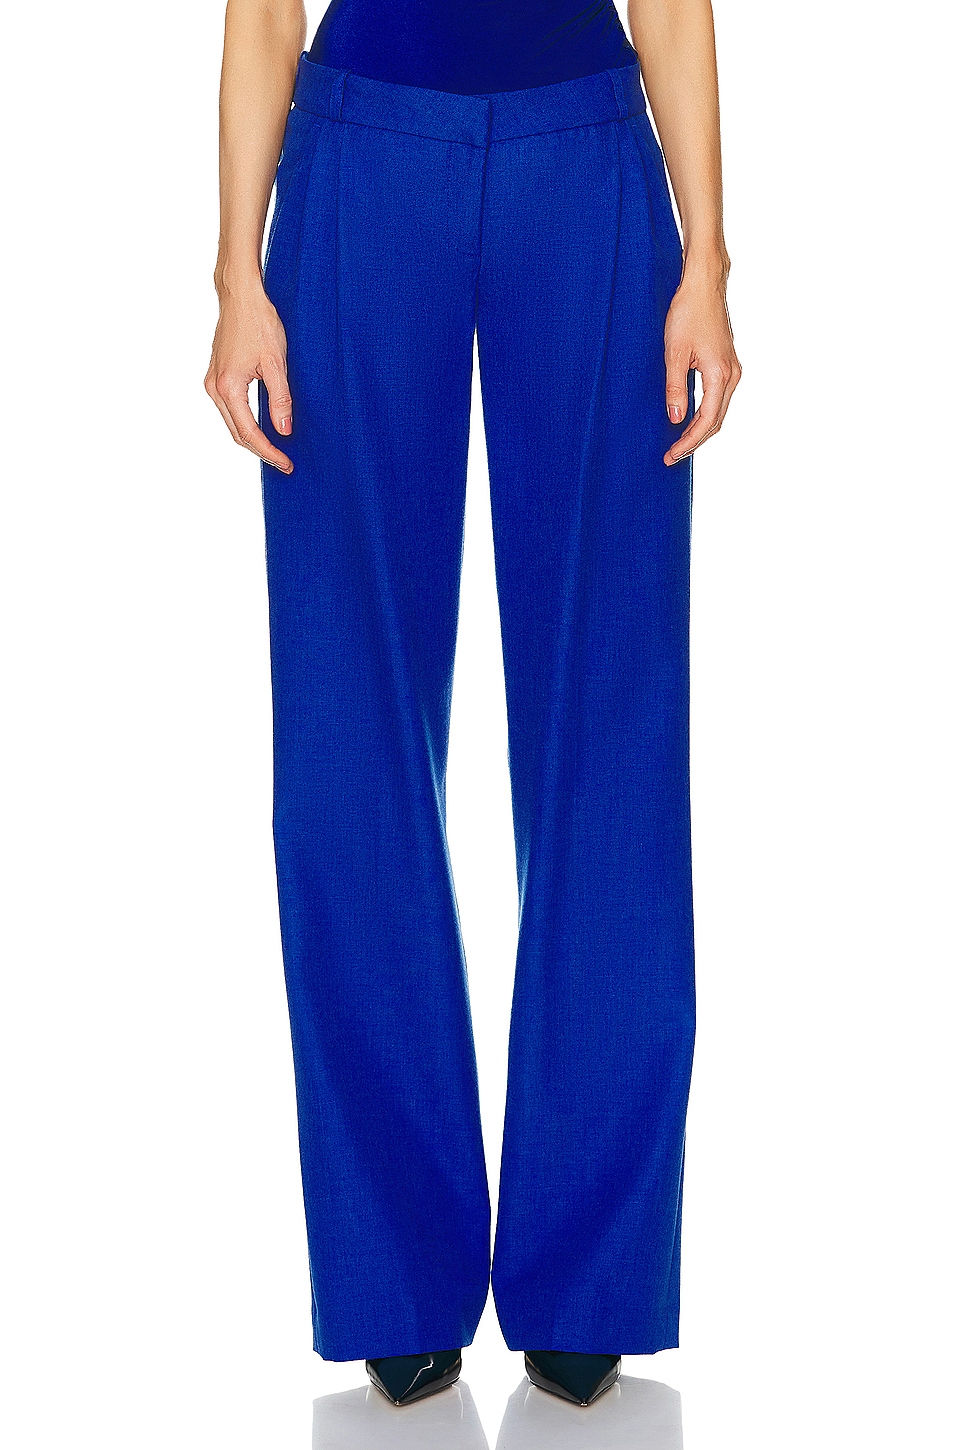 Image 1 of Coperni Low Rise Loose Tailored Trouser in Blue